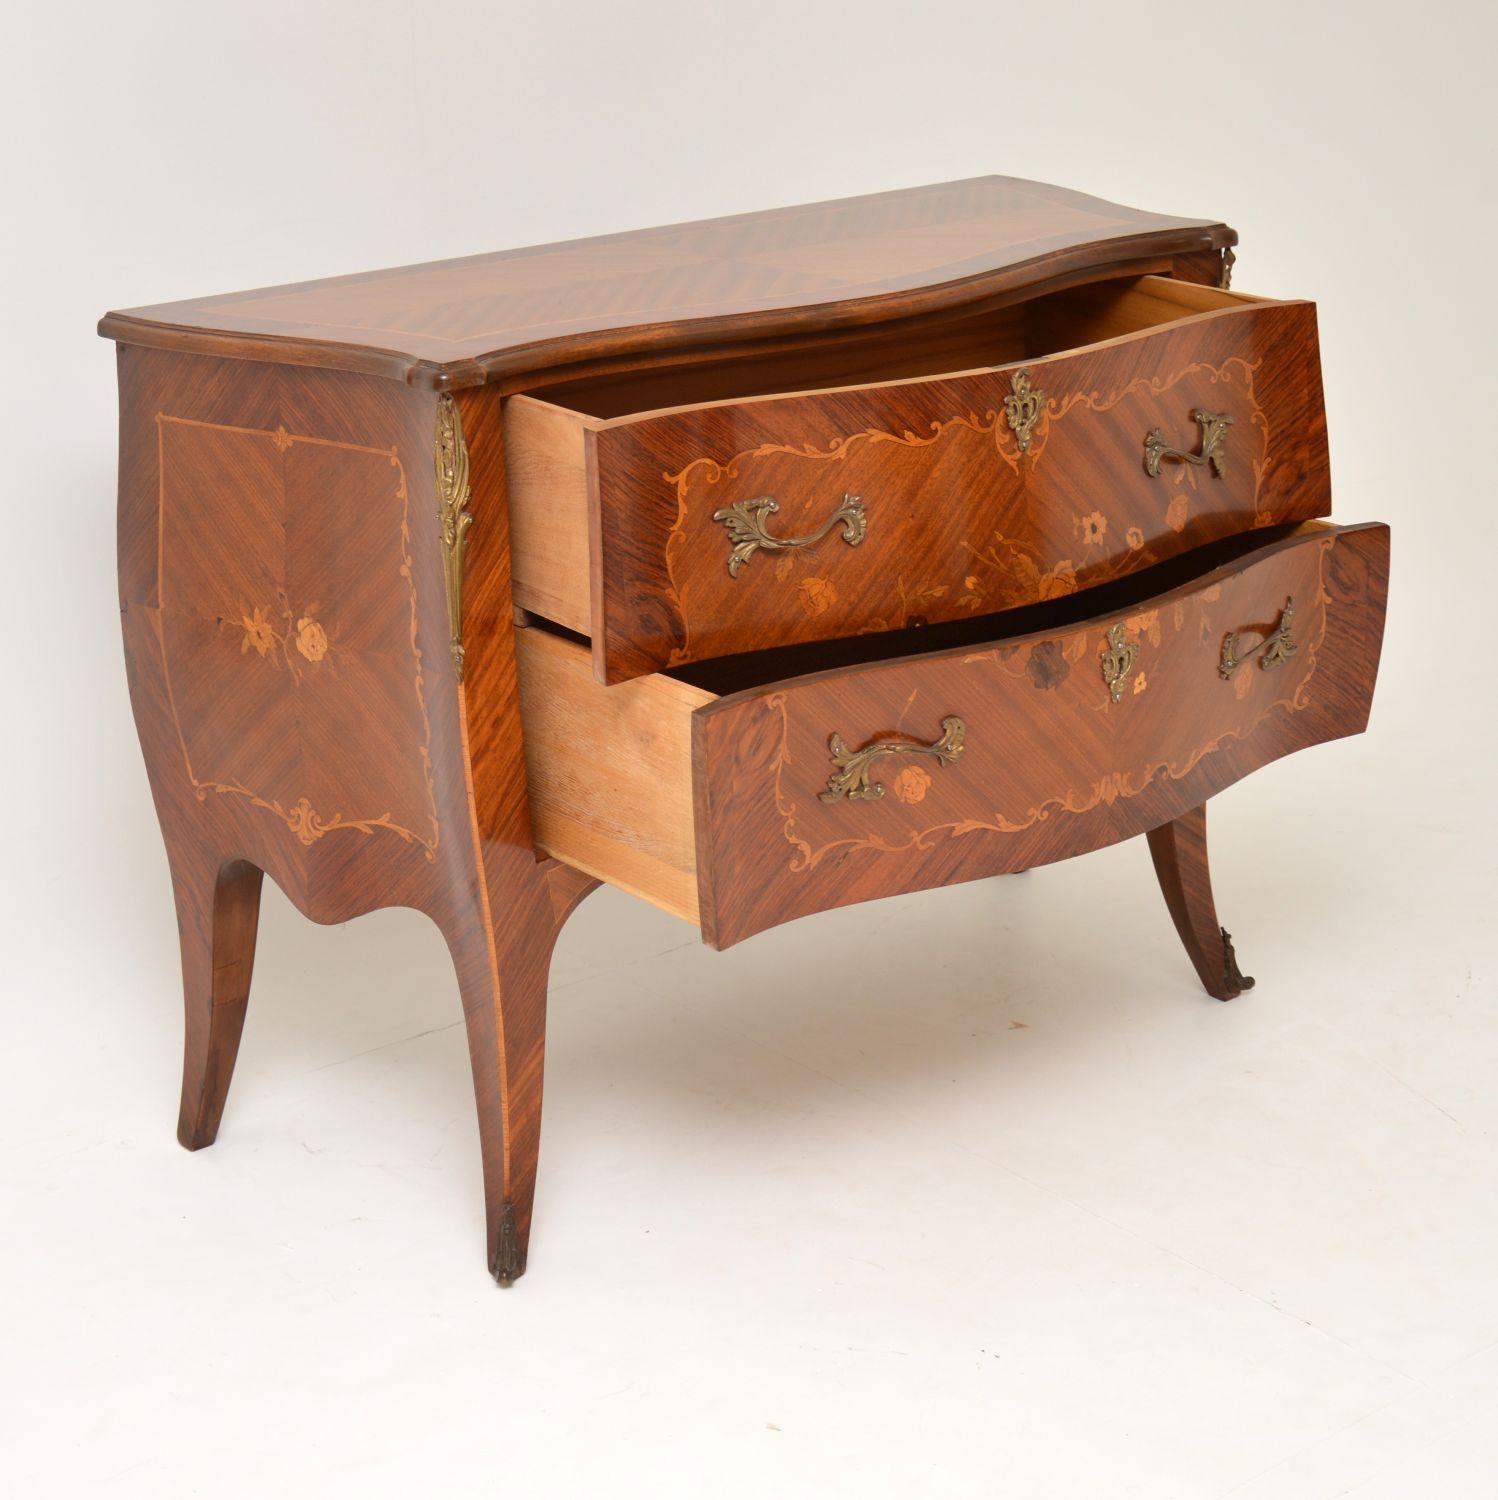 Kingwood Antique French Inlaid Marquetry Bombe Chest